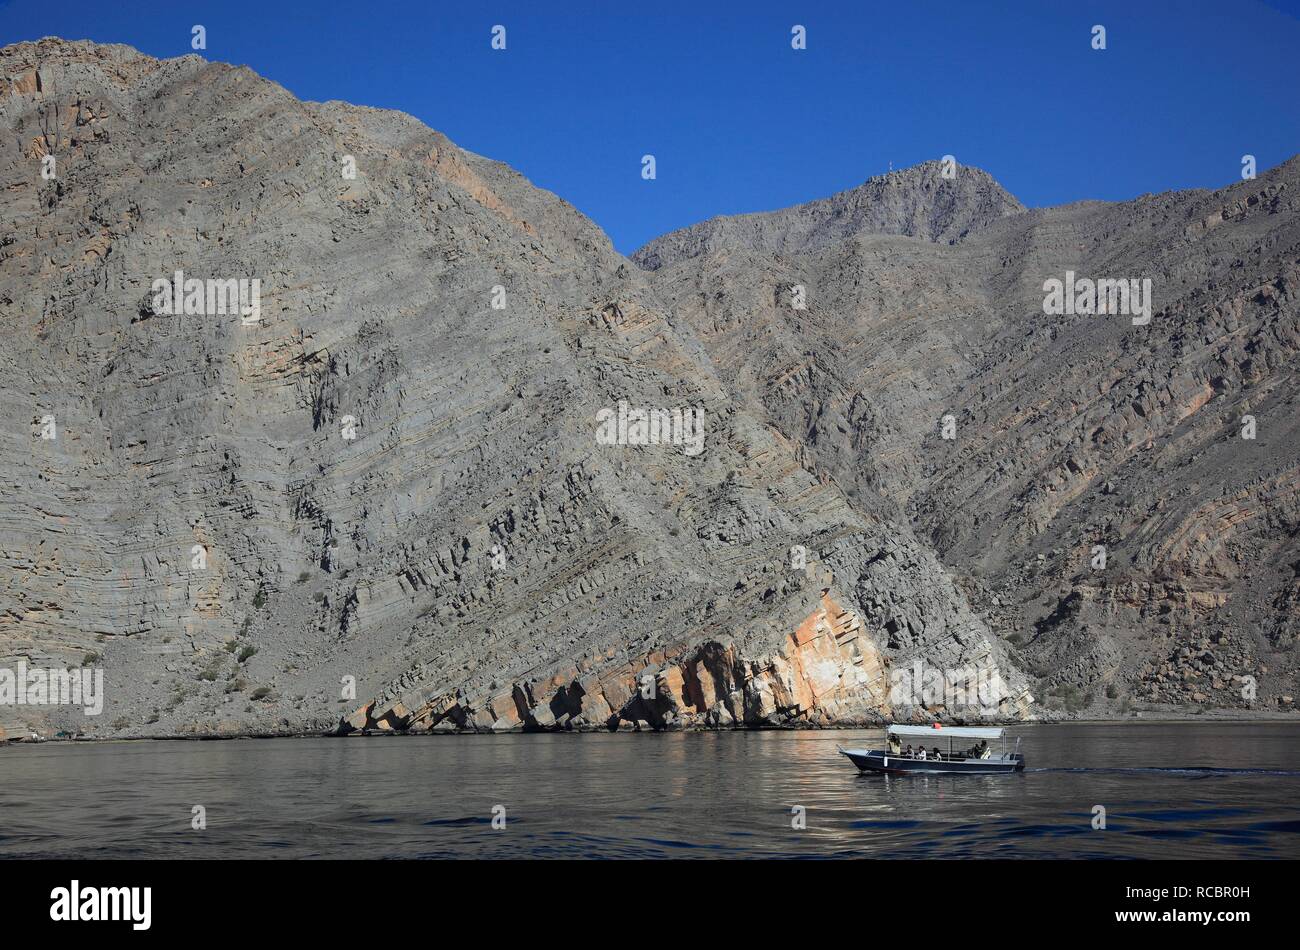 Dhow in the Bays of Musandam, Shimm Strait, in the Omani enclave of Musandam, Oman, Arabian Peninsula, Middle East, Asia Stock Photo